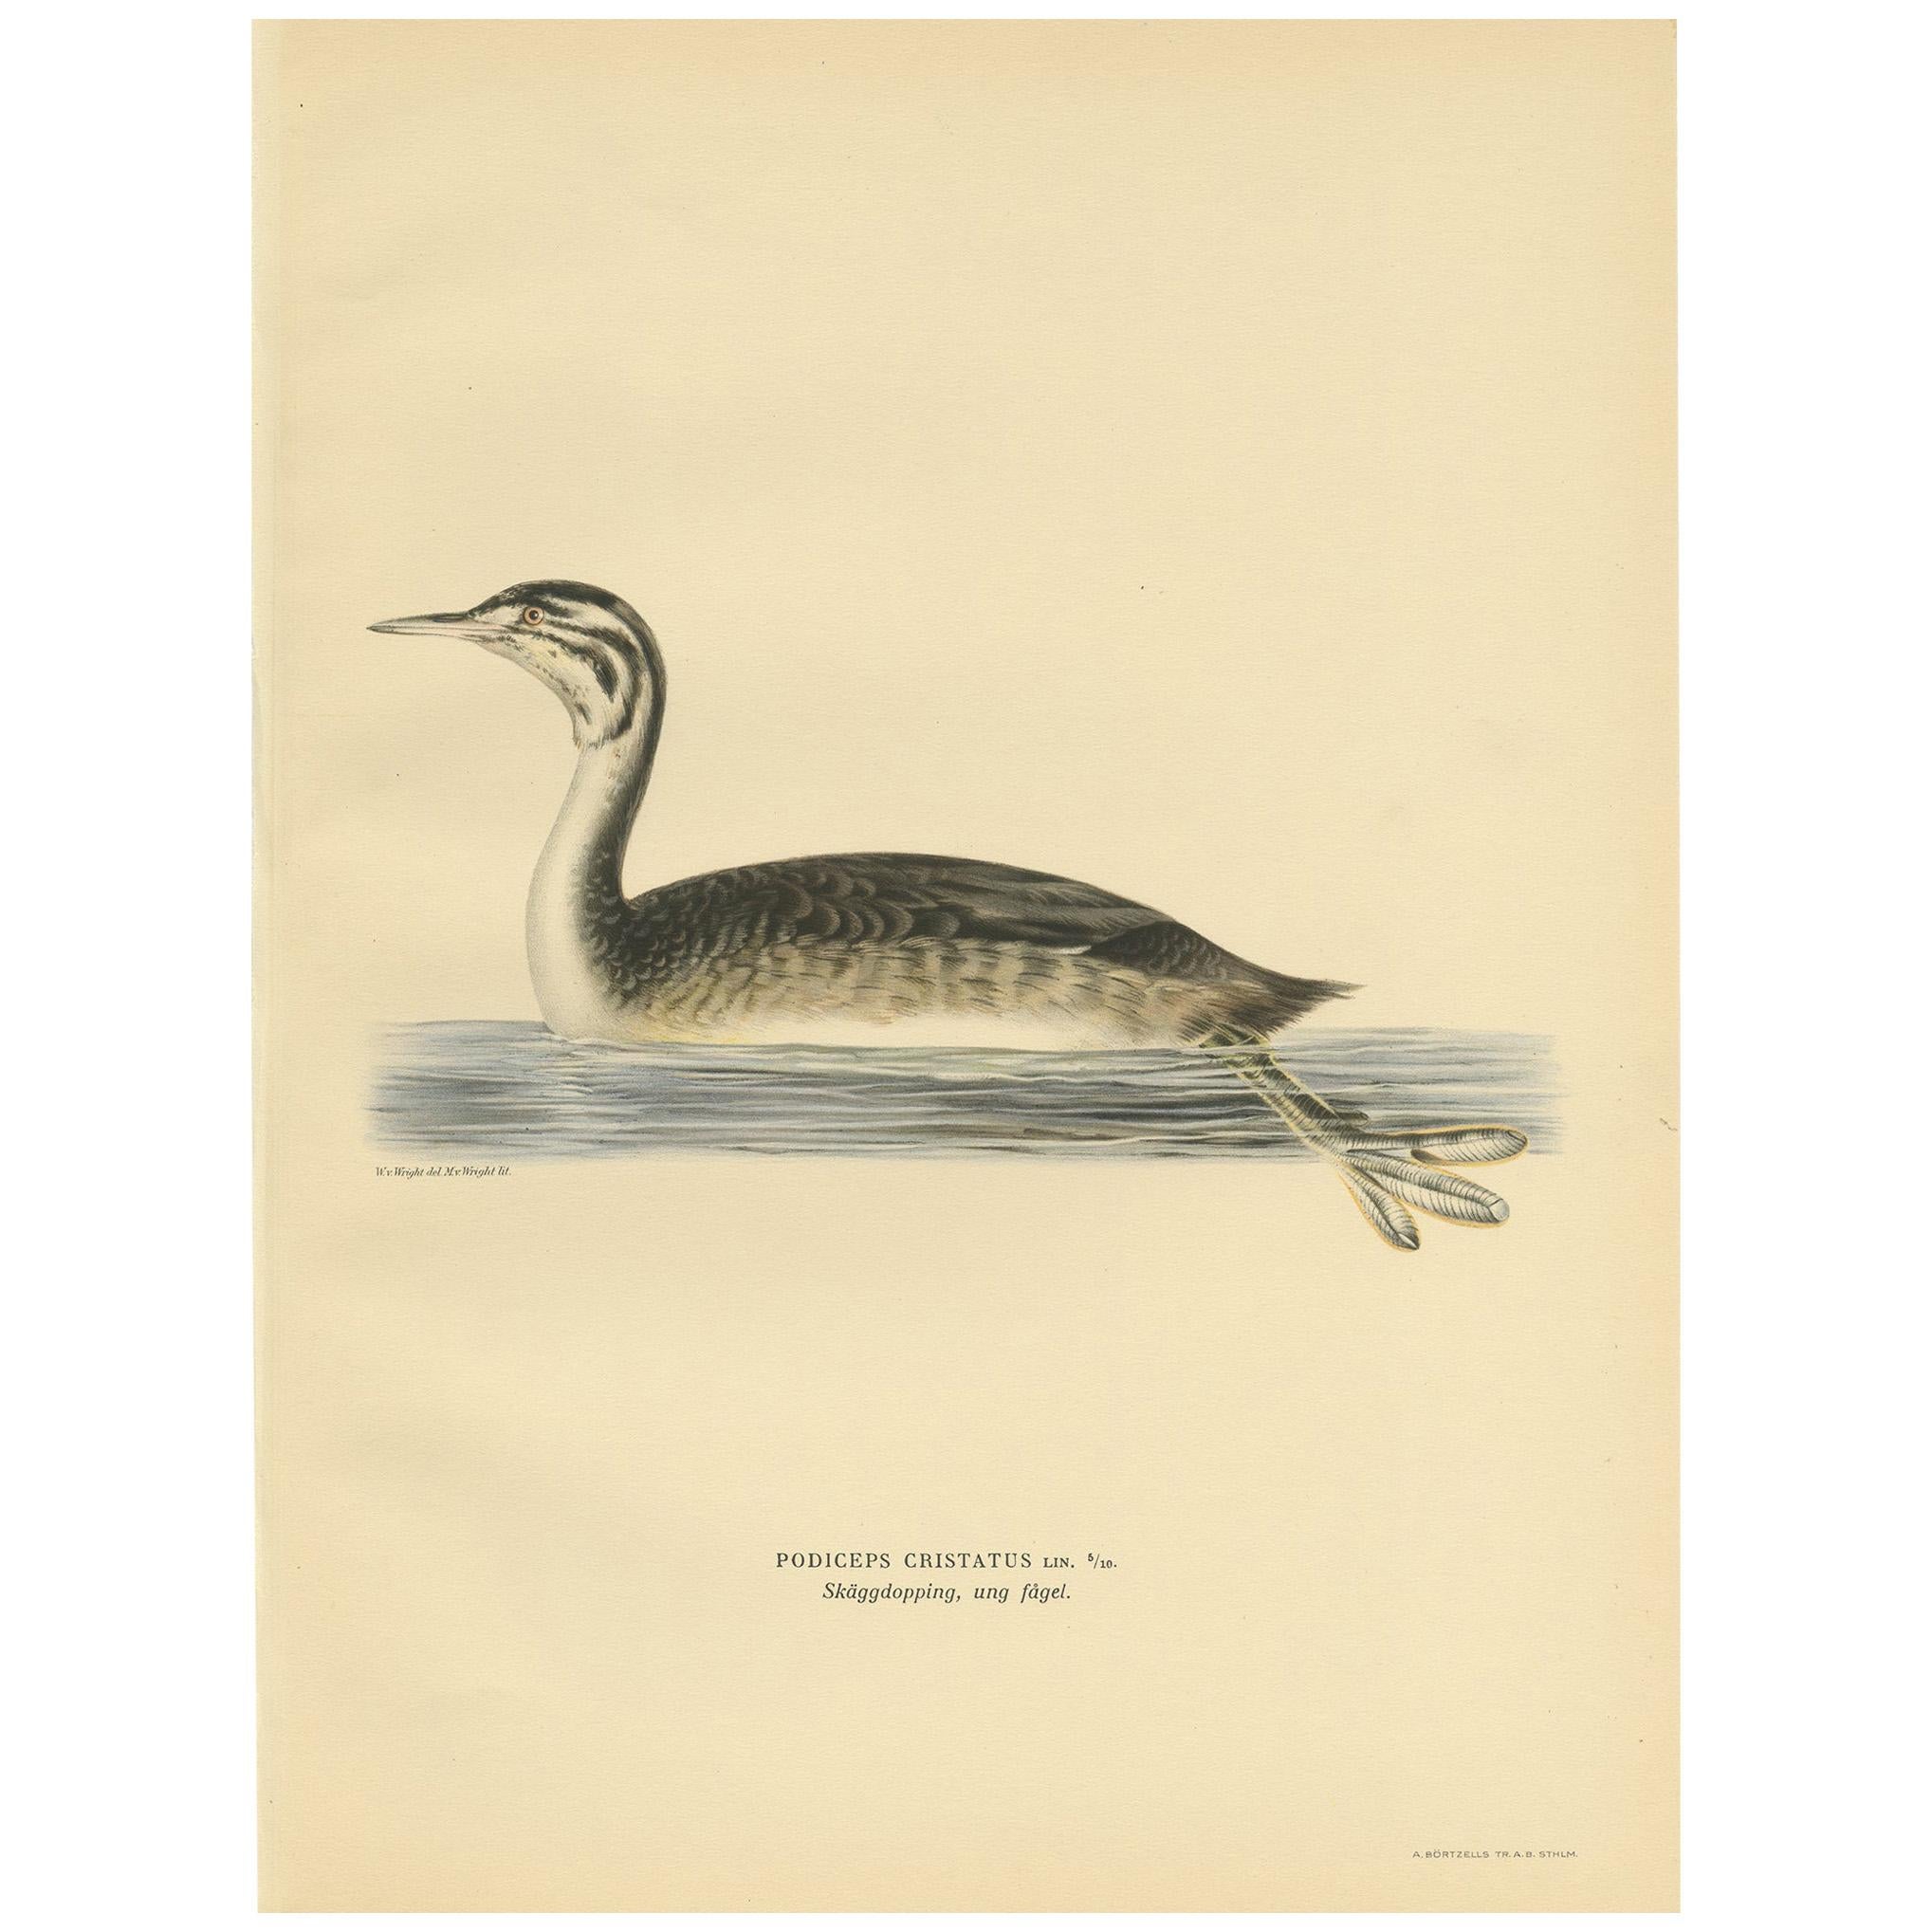 Antique Bird Print of a Young Great Crested Grebe by Von Wright, 1929